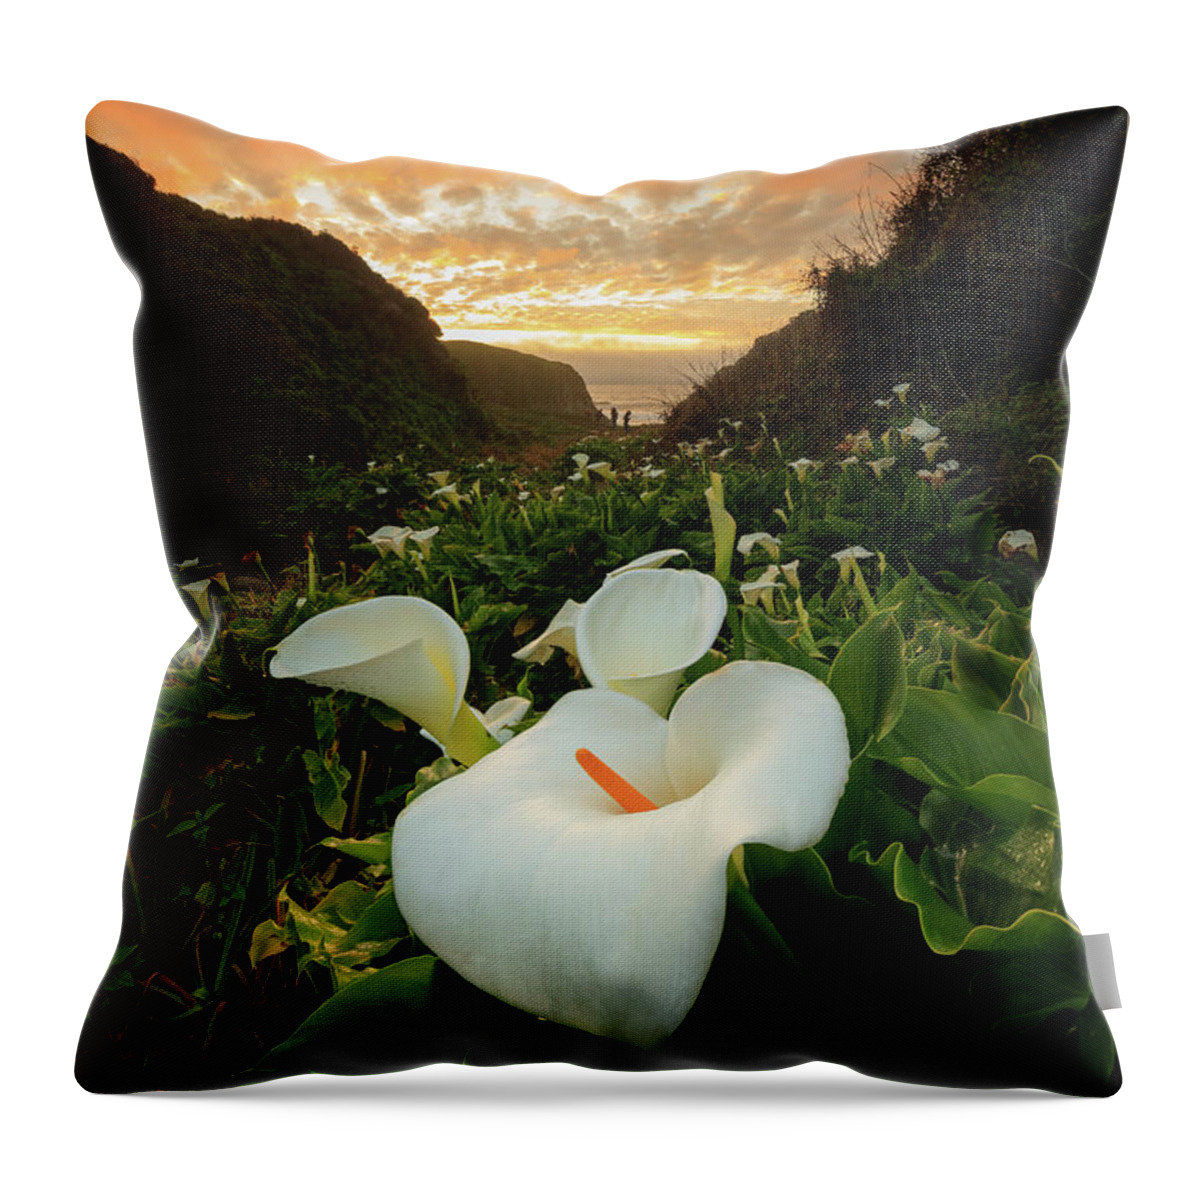 Sunset Throw Pillow featuring the photograph Sunset Over The Flowers by Erick Castellon